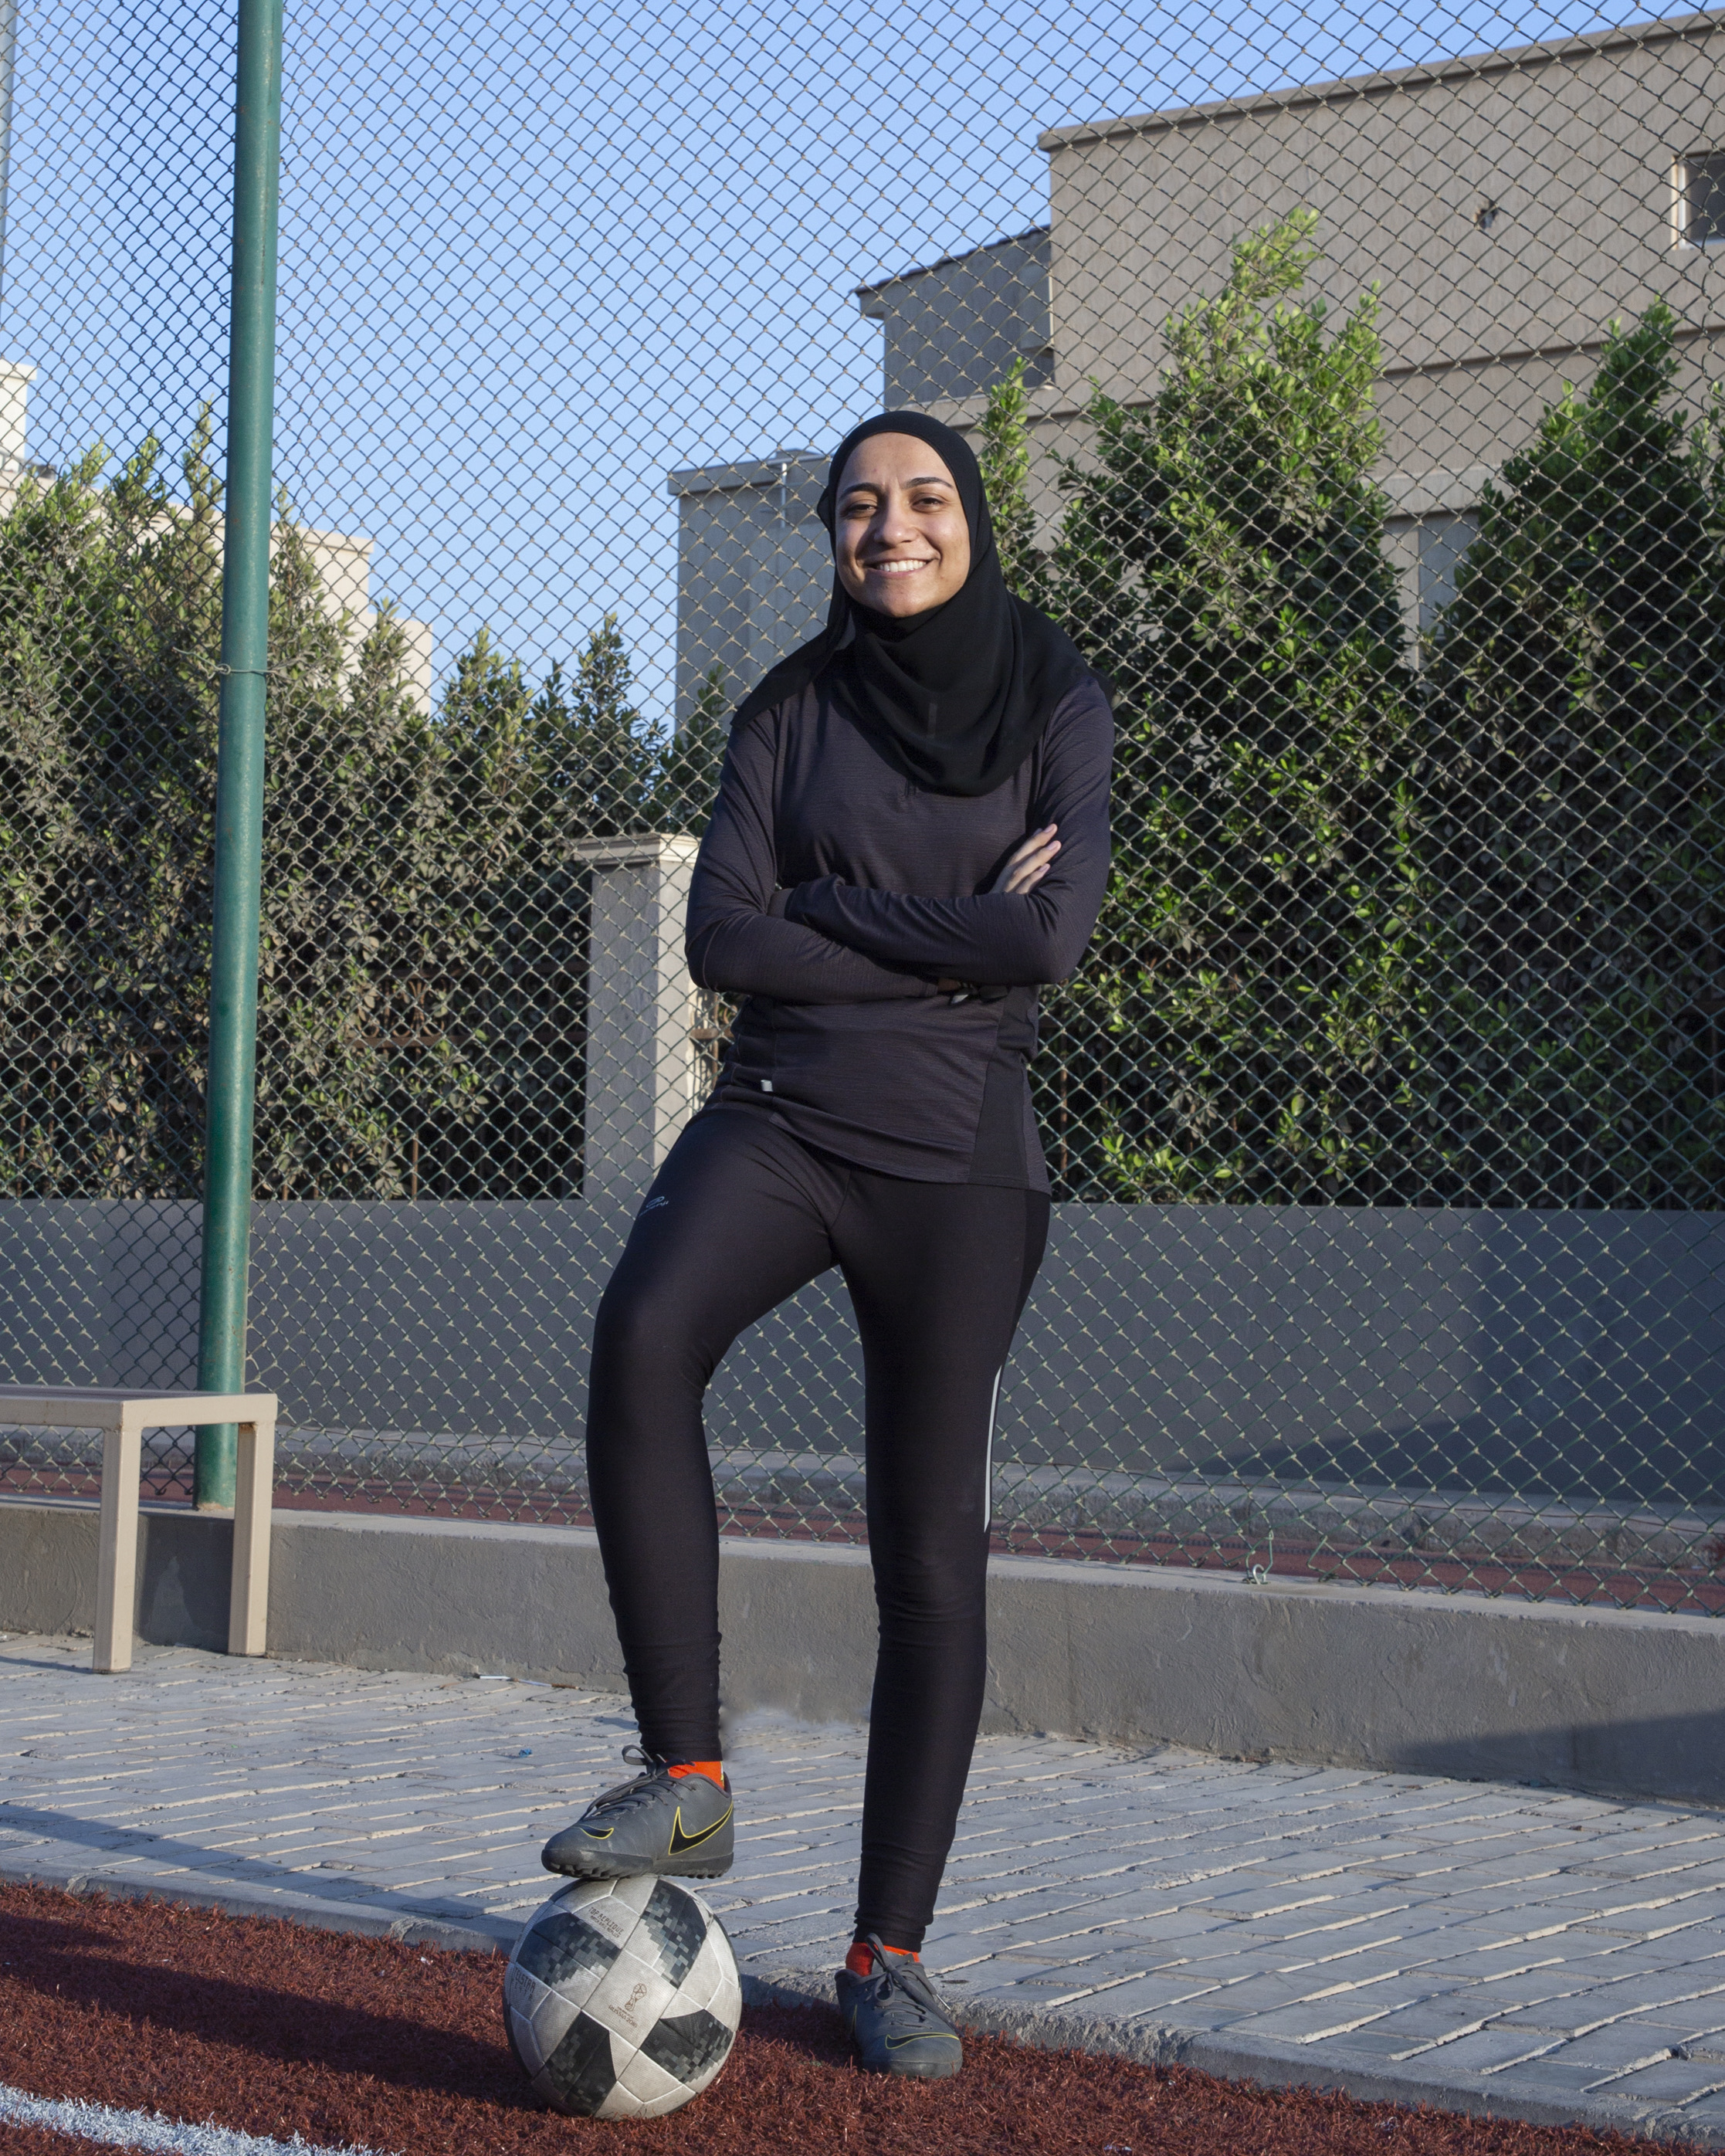 A woman stands outdoors, dressed in black workout gear and head covering. She smiles at the viewer with her arms crossed and right foot resting on a soccer ball.